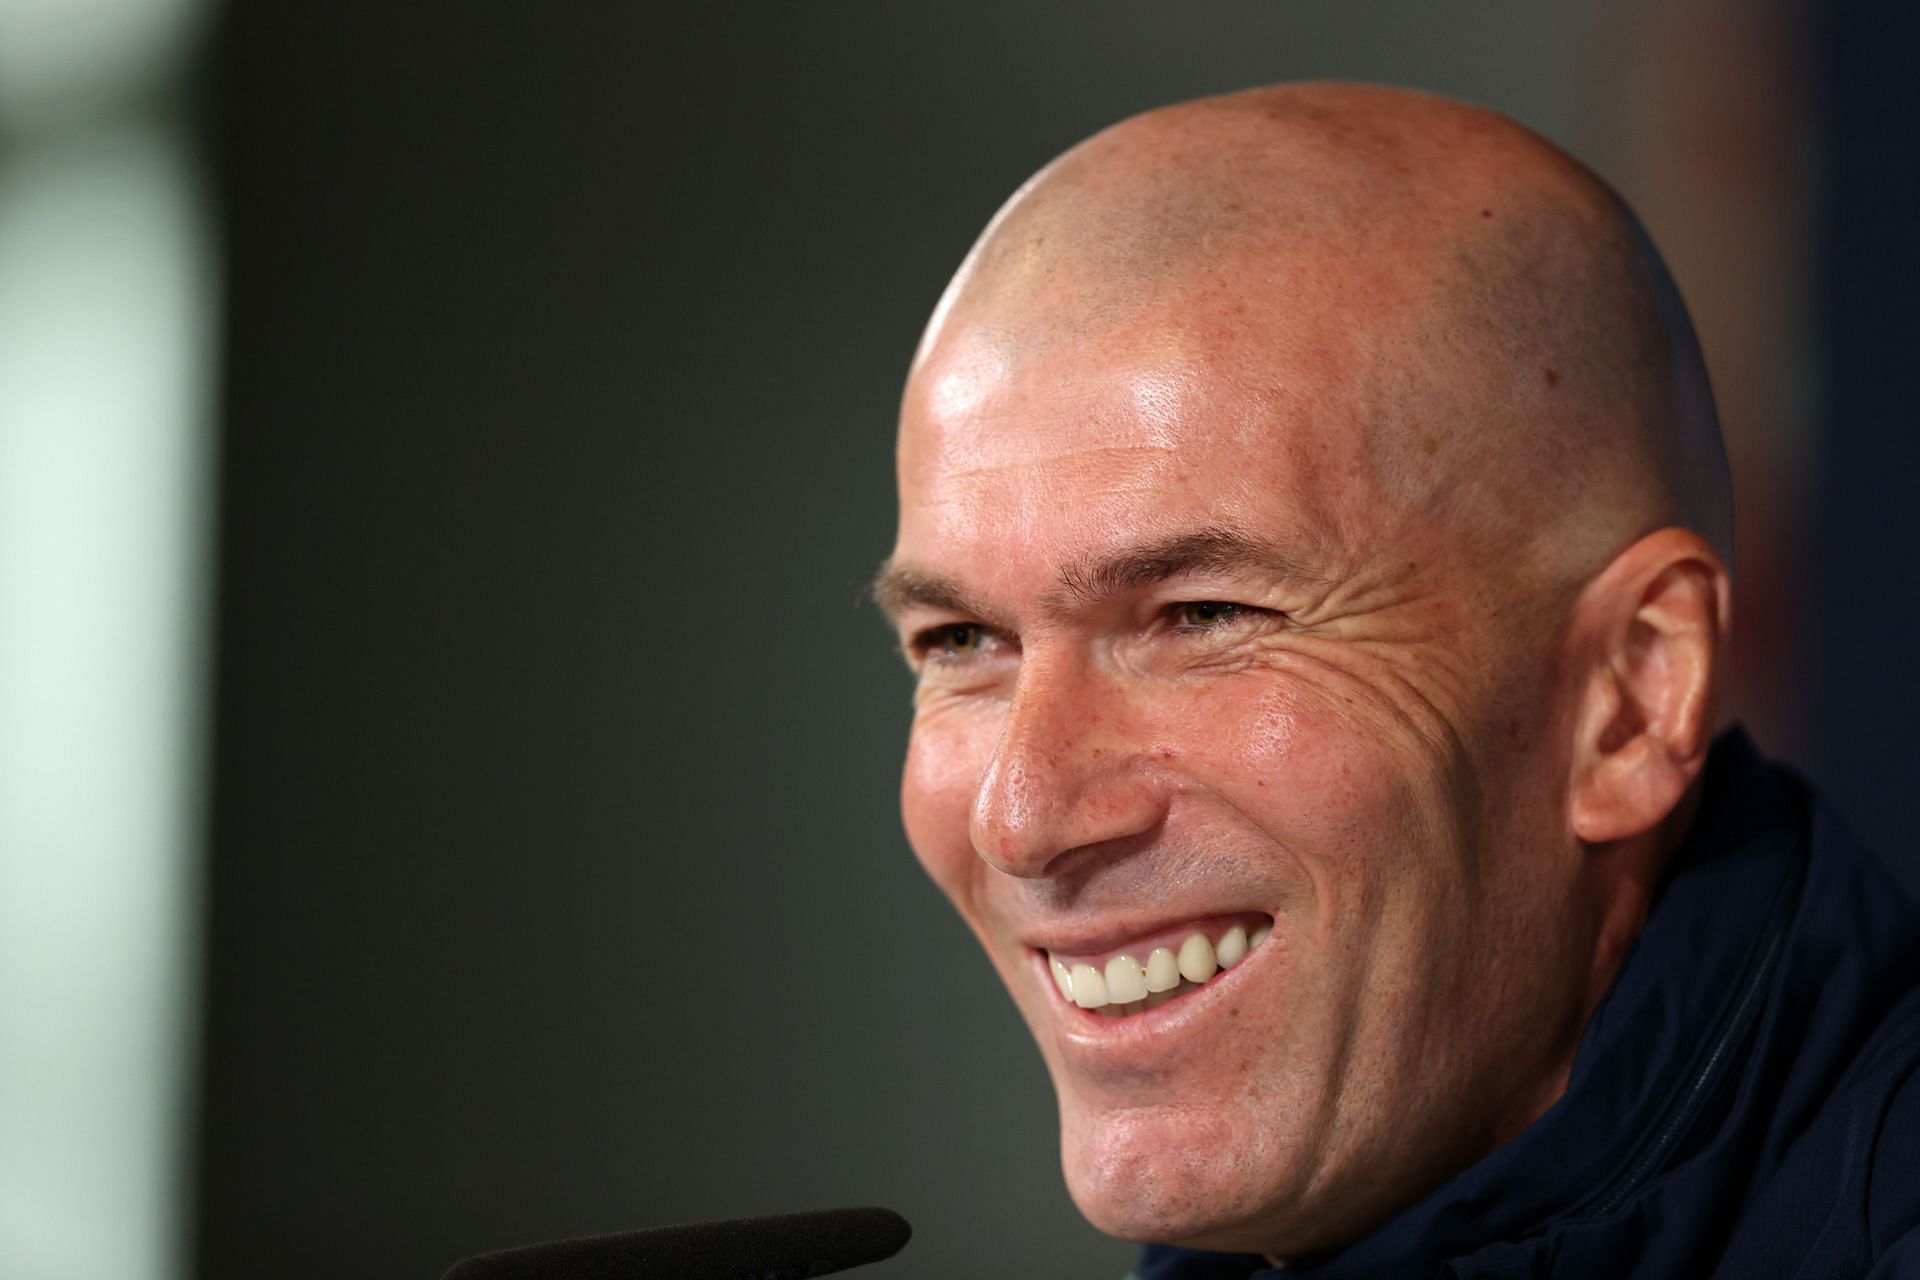 Zinedine Zidane was a legend as a player and manager for Real Madrid.